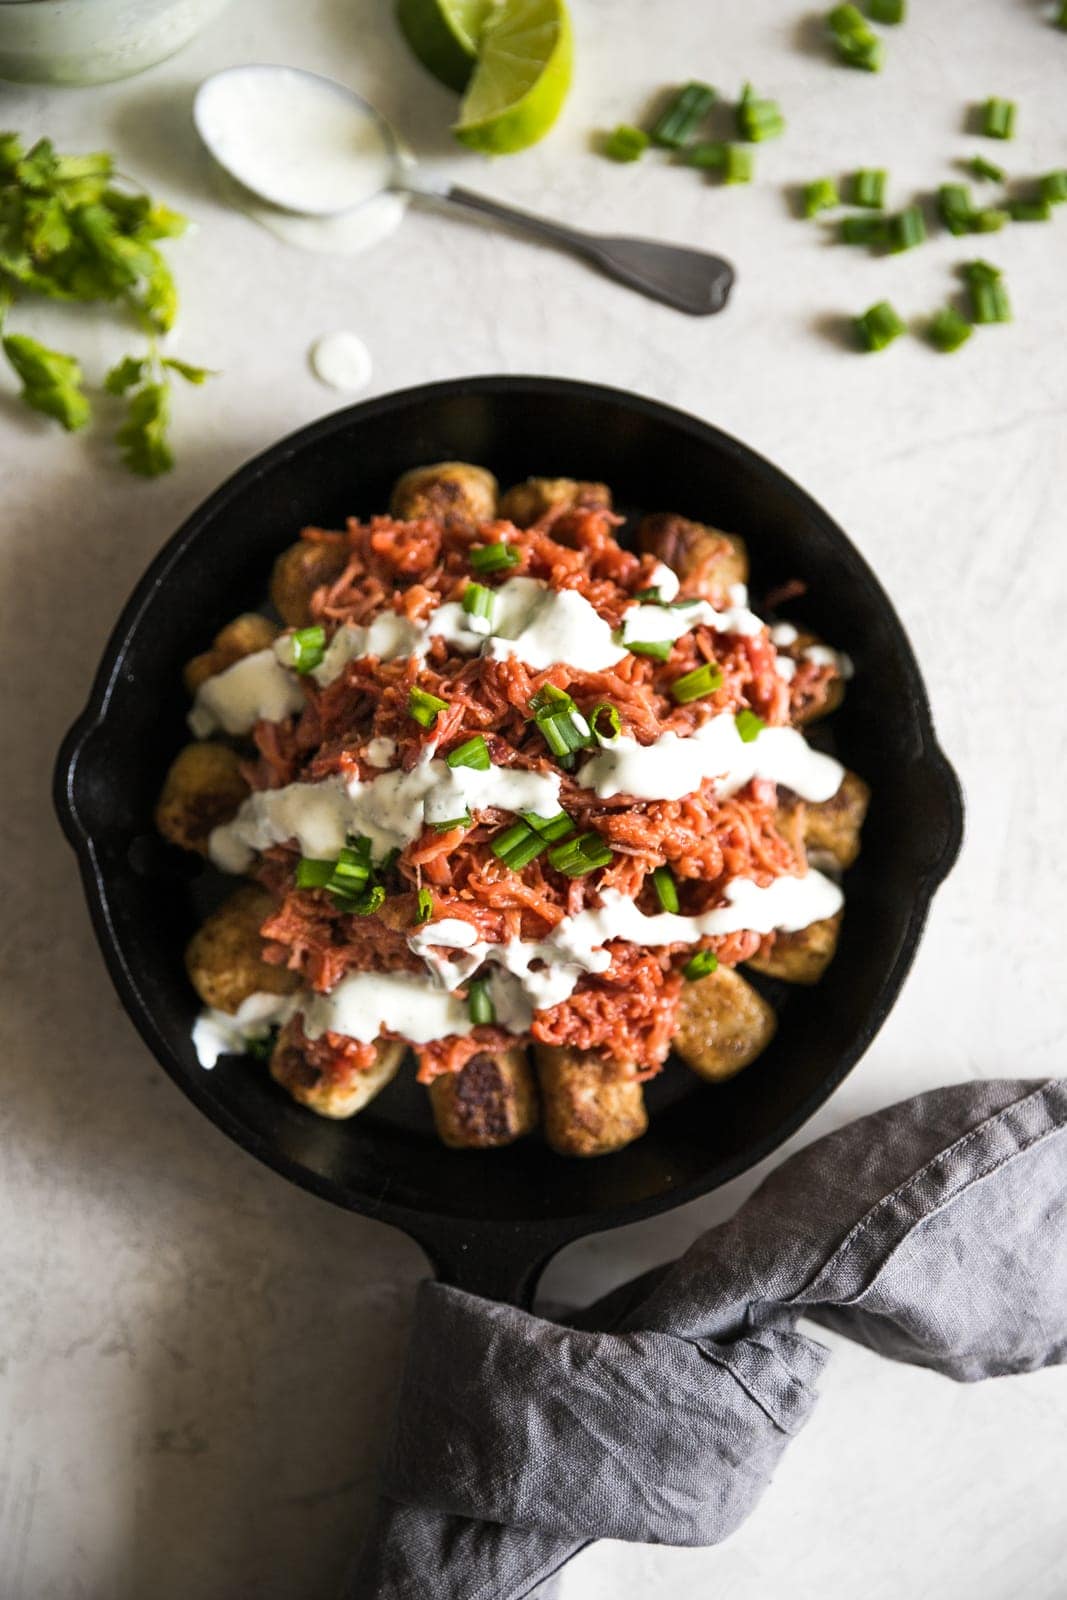 Pulled Pork Yuca Tots with Cilantro Garlic Sauce. Yuca, aka cassava, turned into tots topped with juicy bbq pulled pork and cilantro garlic sauce!